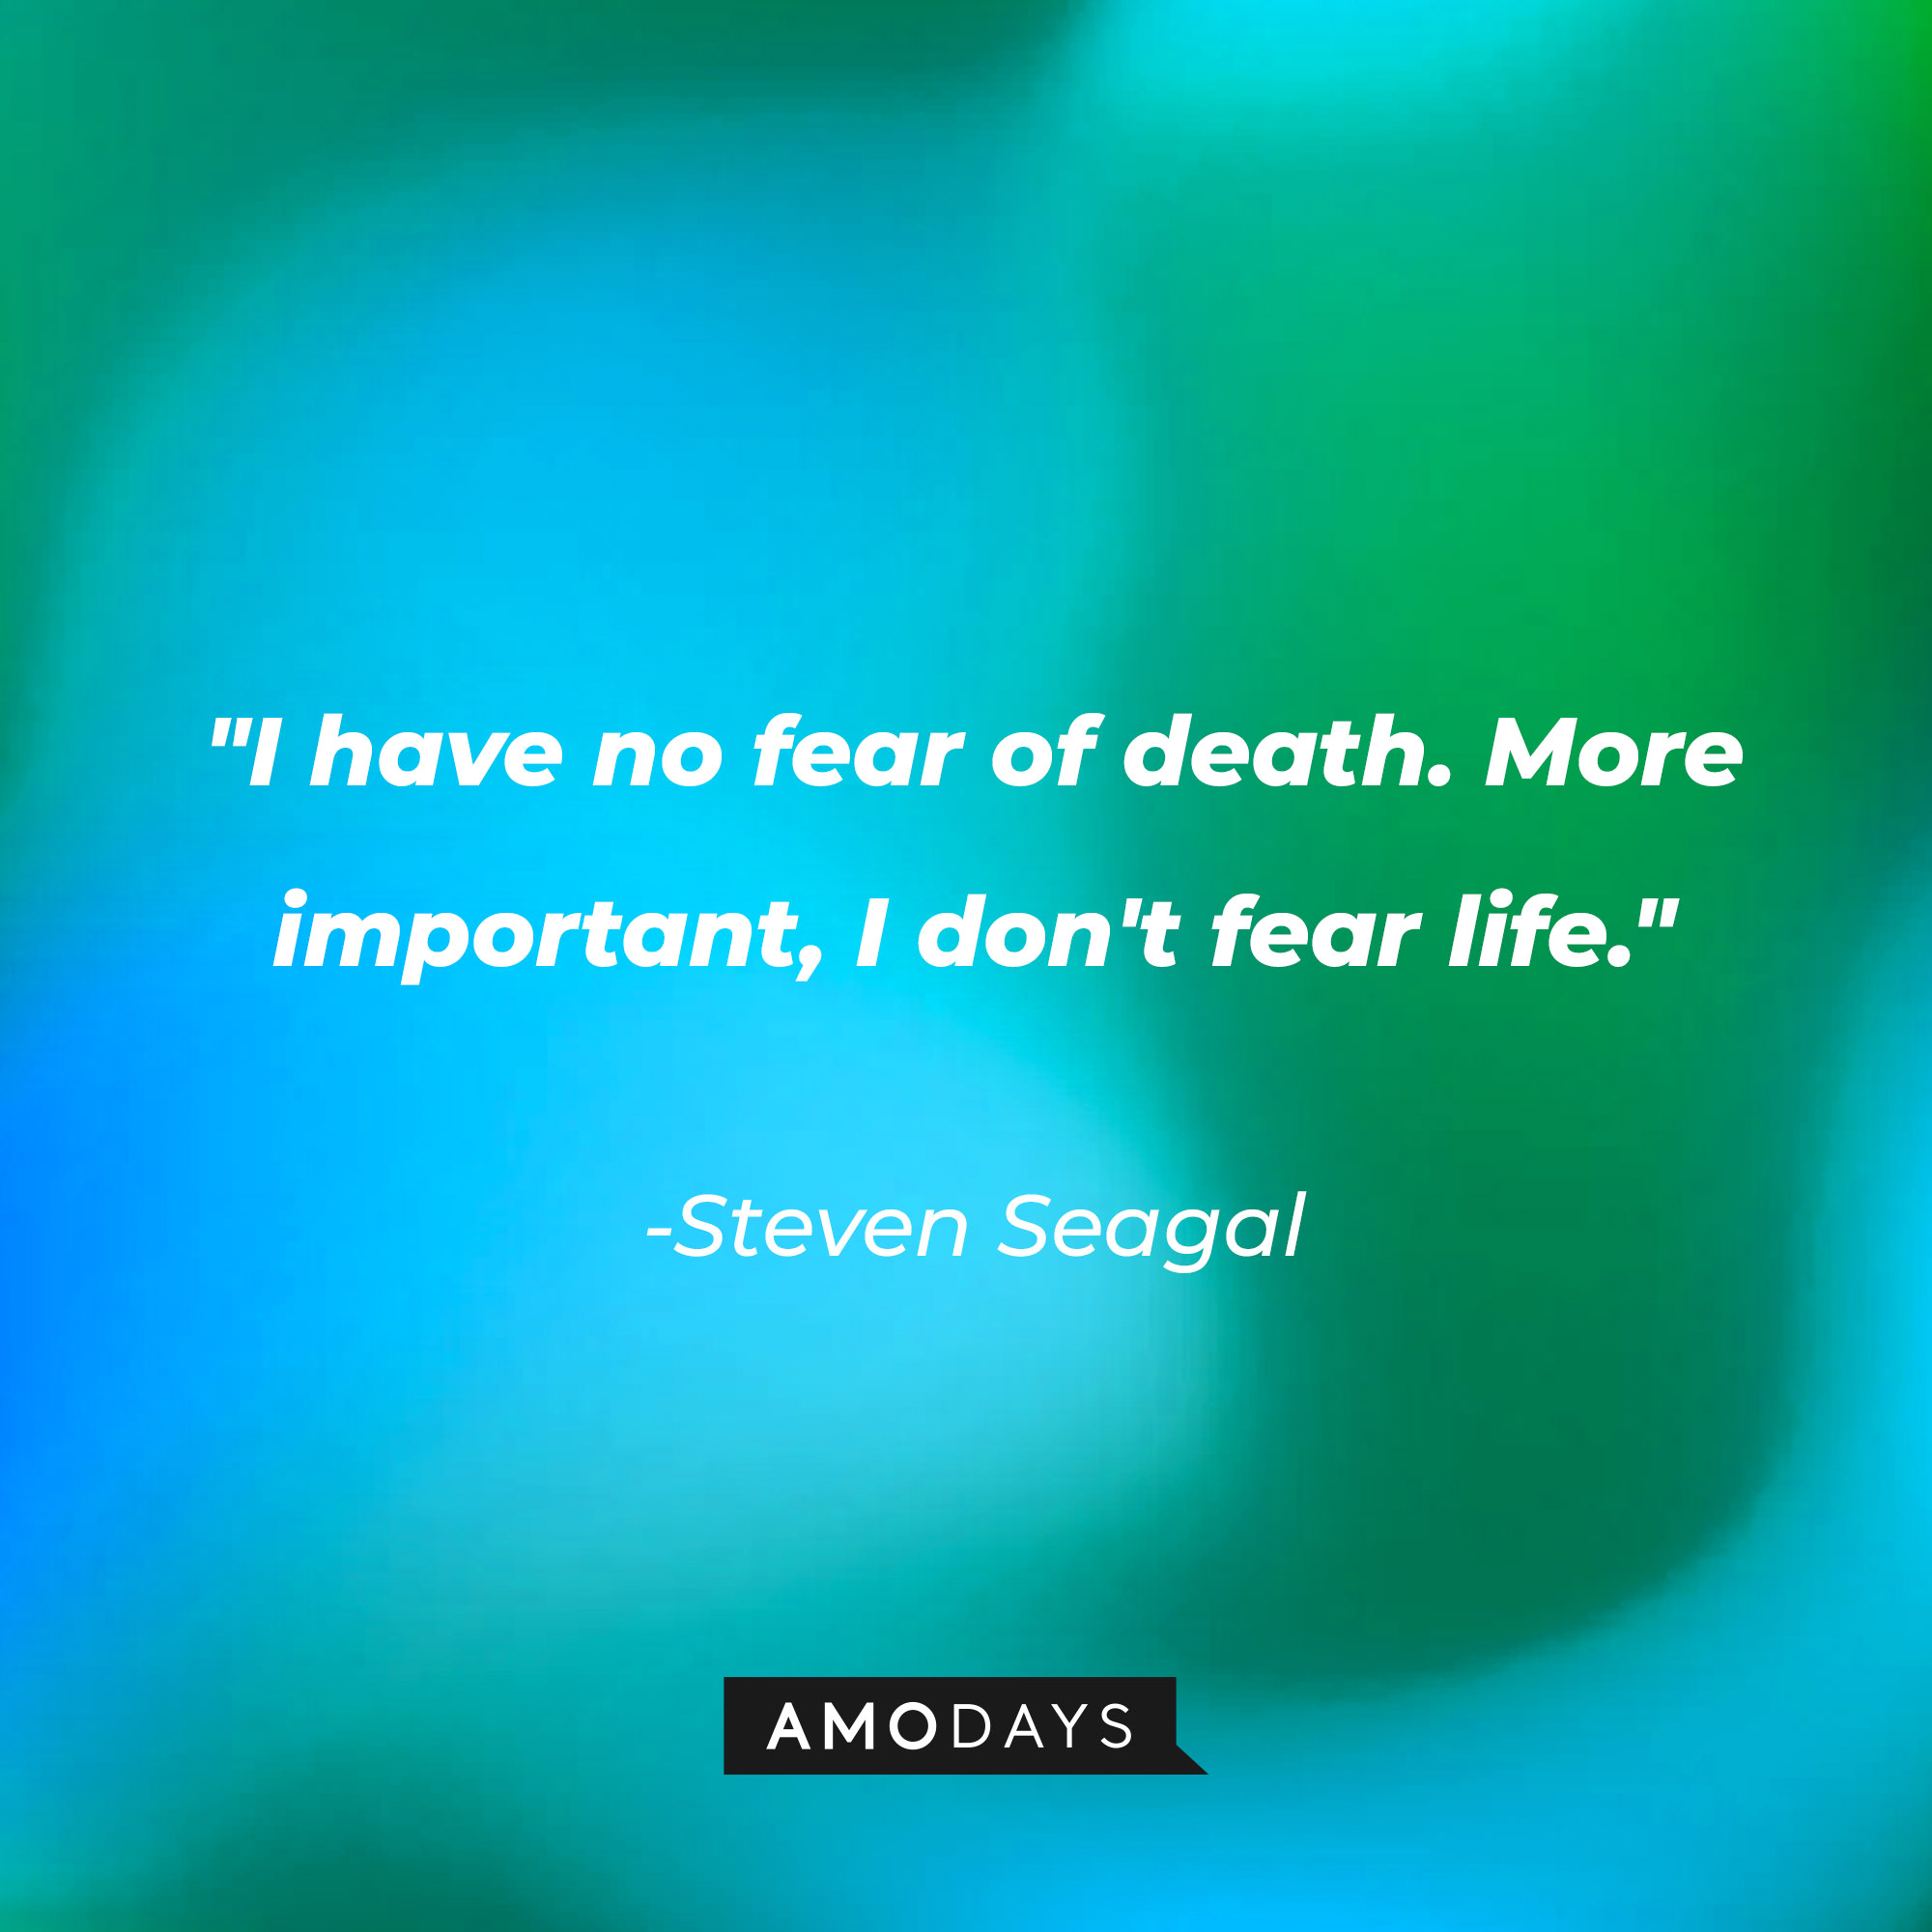 Steven Seagal’s quote: "I have no fear of death. More important, I don't fear life." | Image: AmoDays